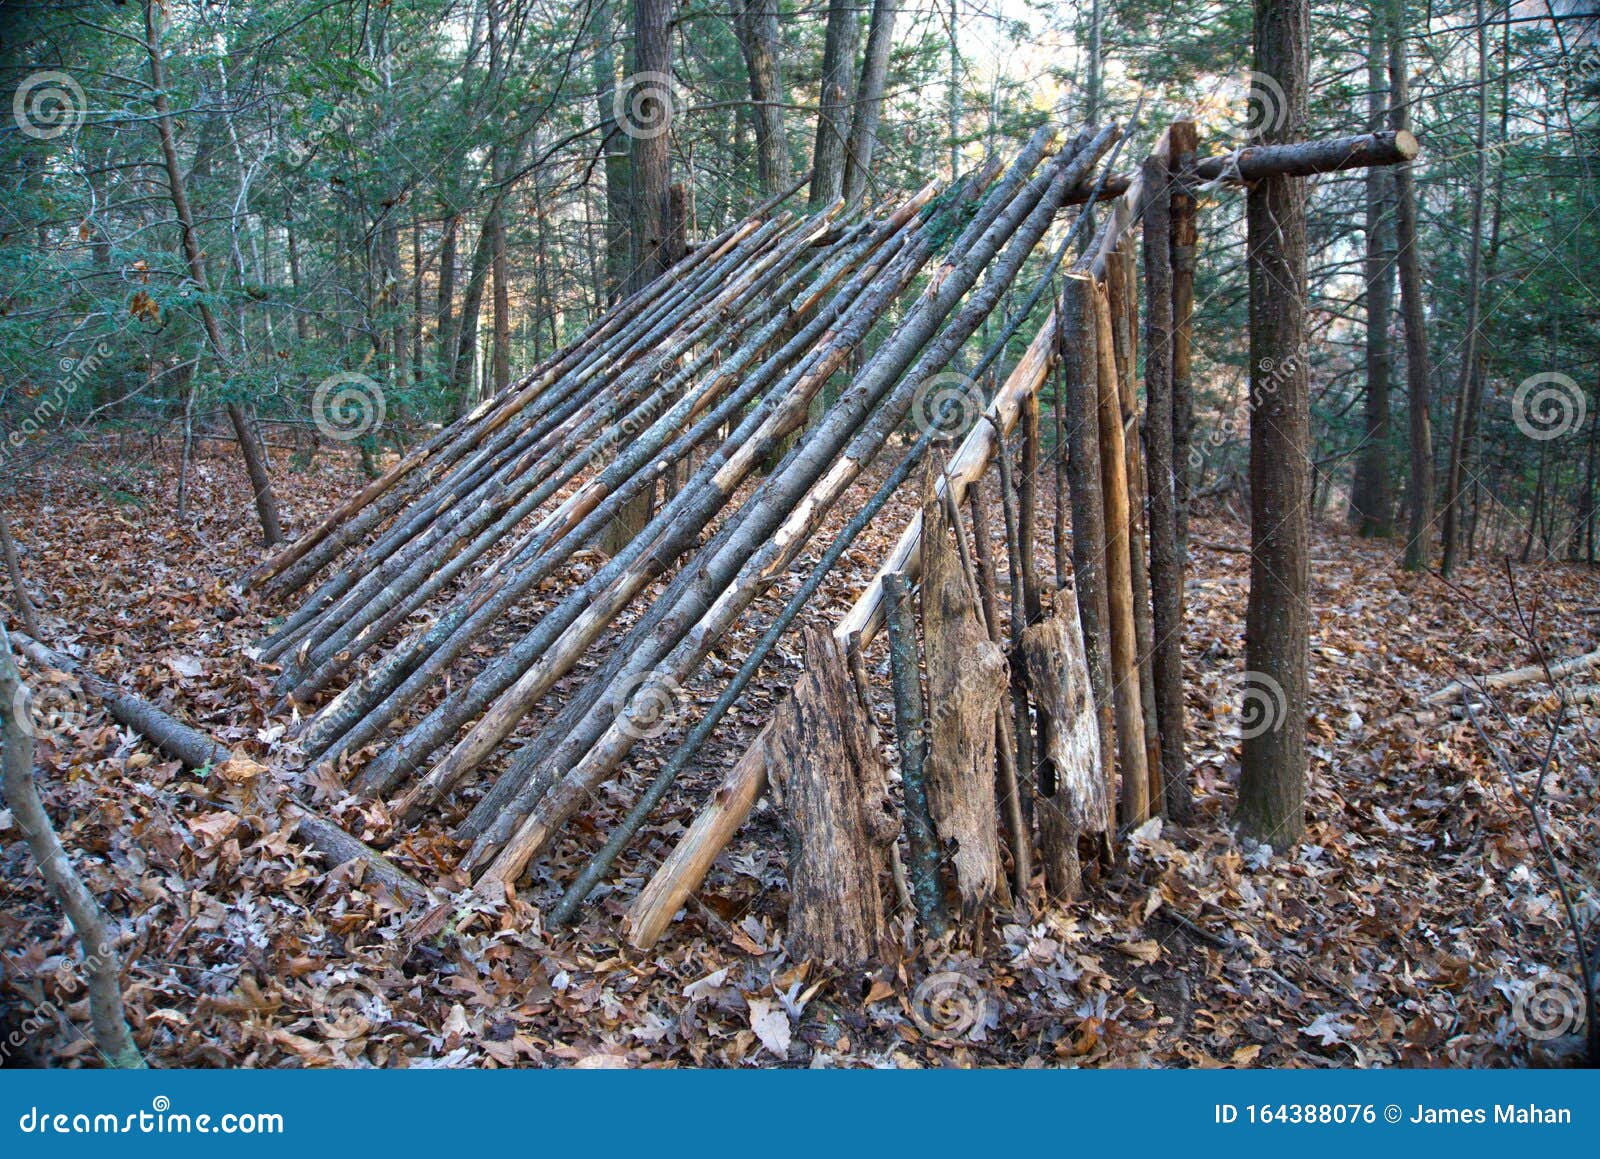 Primitive Lean To Survival Shelter in the Forest. Makeshift Campsite in the  Wilderness. Essential Bushcraft Skill Stock Photo - Image of homeless,  primitive: 164388076